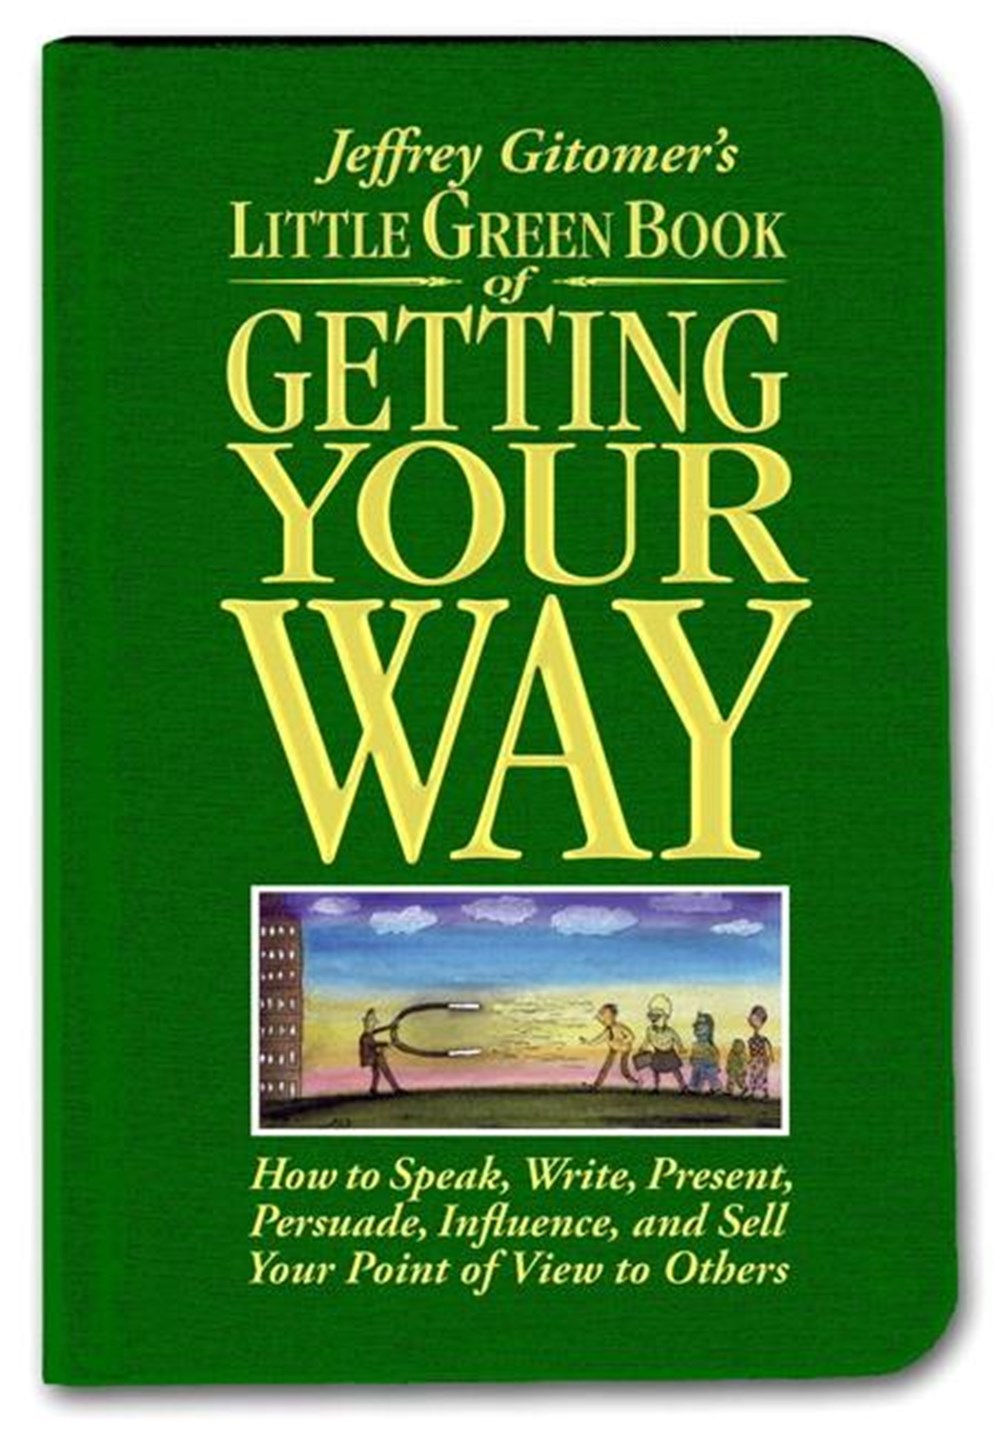 Little Green Book of Getting Your Way: How to Speak, Write, Present, Persuade, Influence, and Sell Y